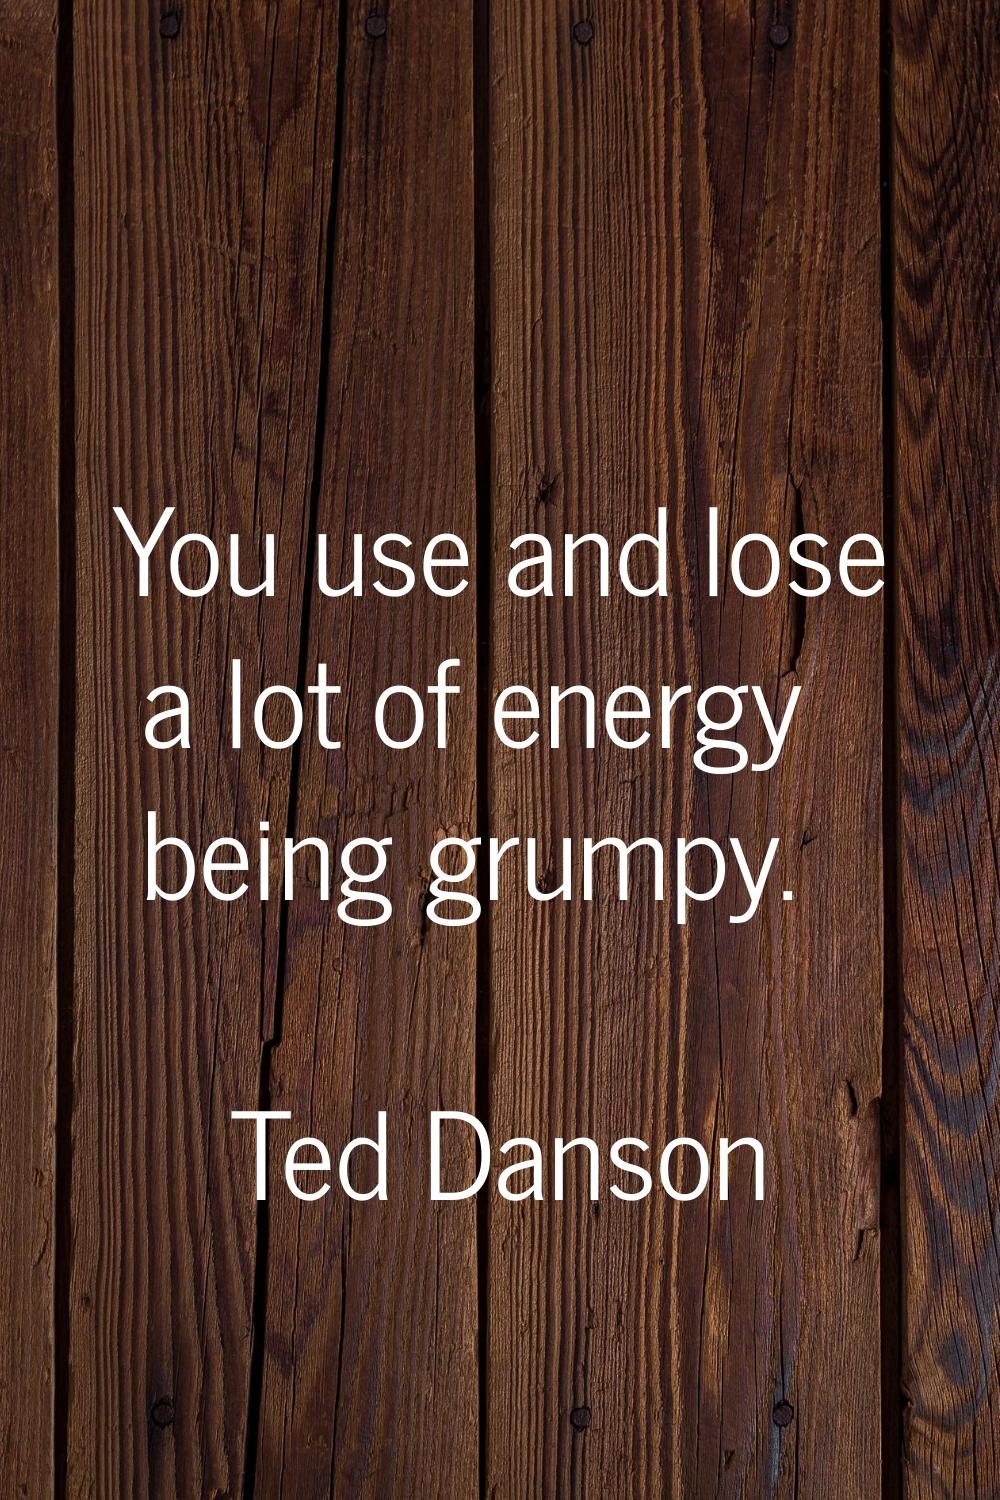 You use and lose a lot of energy being grumpy.